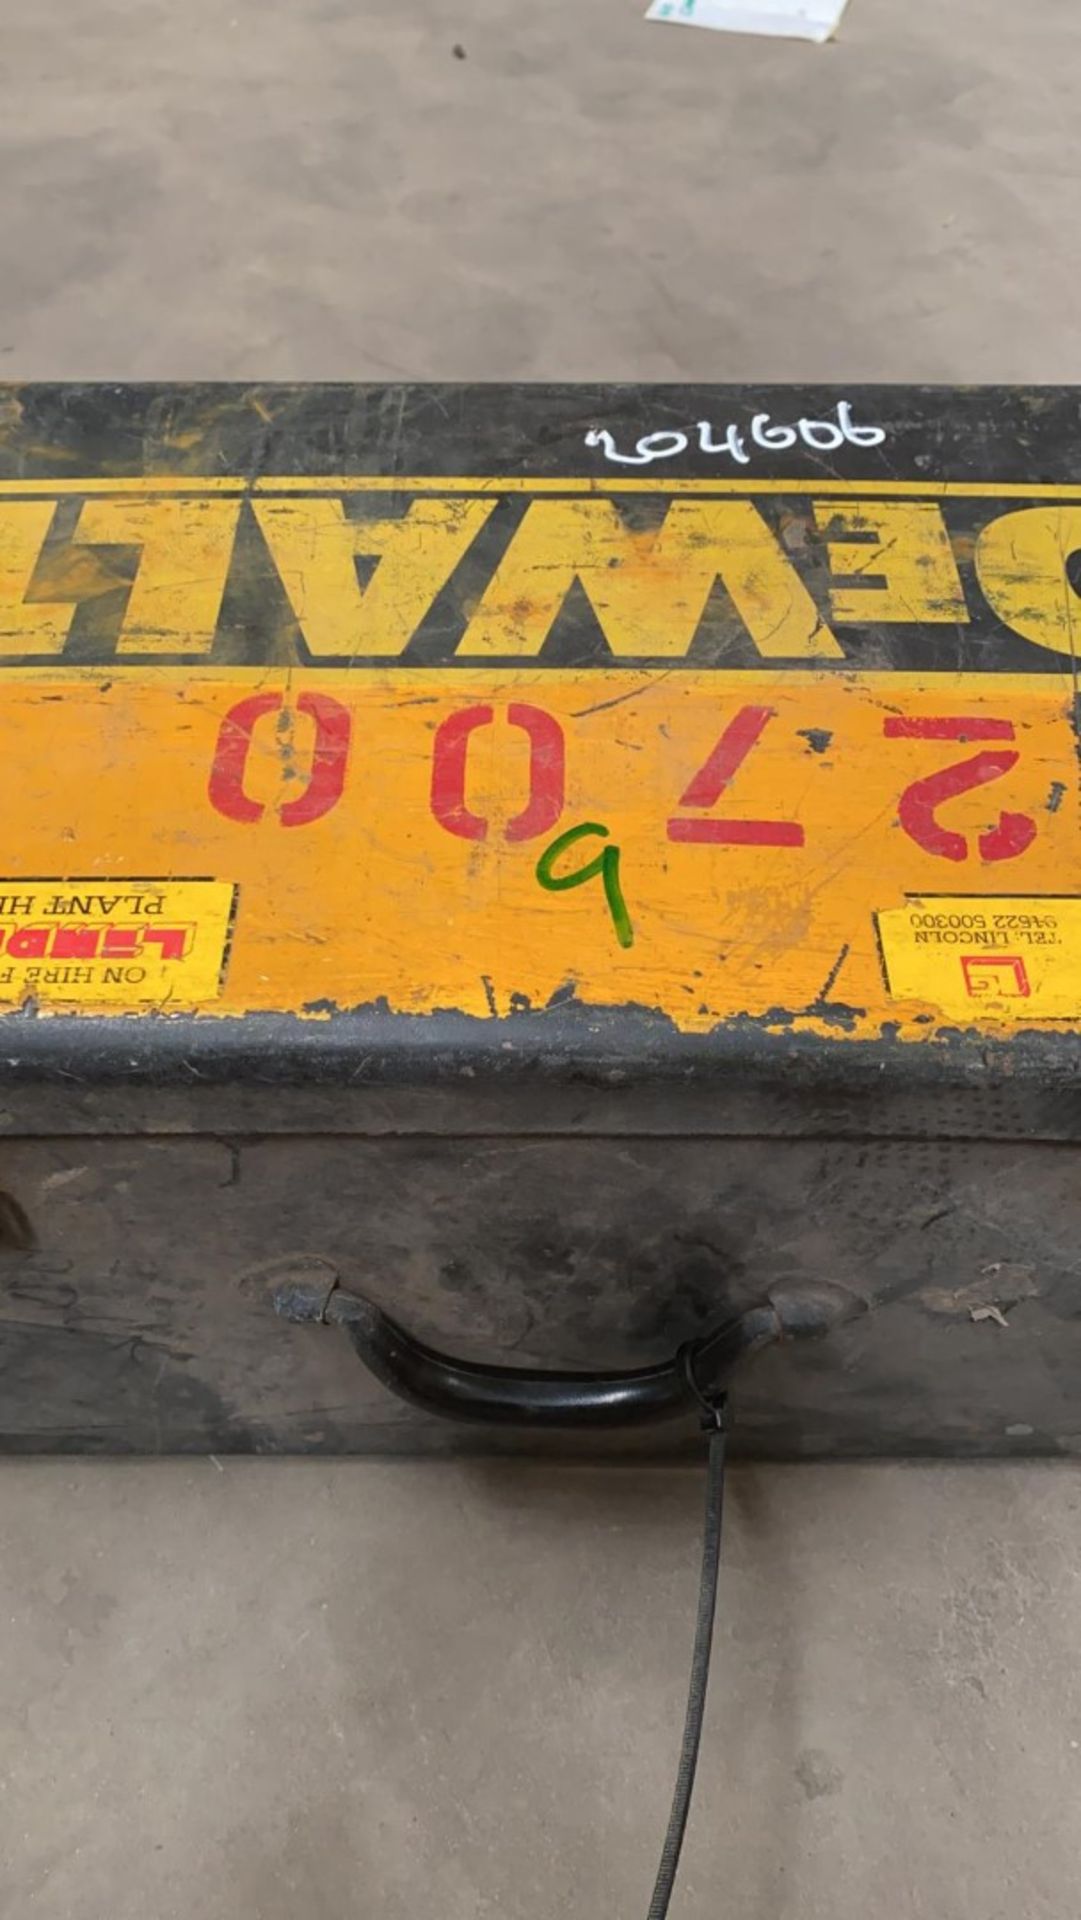 1 x Dewalt DW625EL 110V Router - Used, Recently Removed From A Working Site - CL505 - Ref: TL009 - - Image 2 of 4